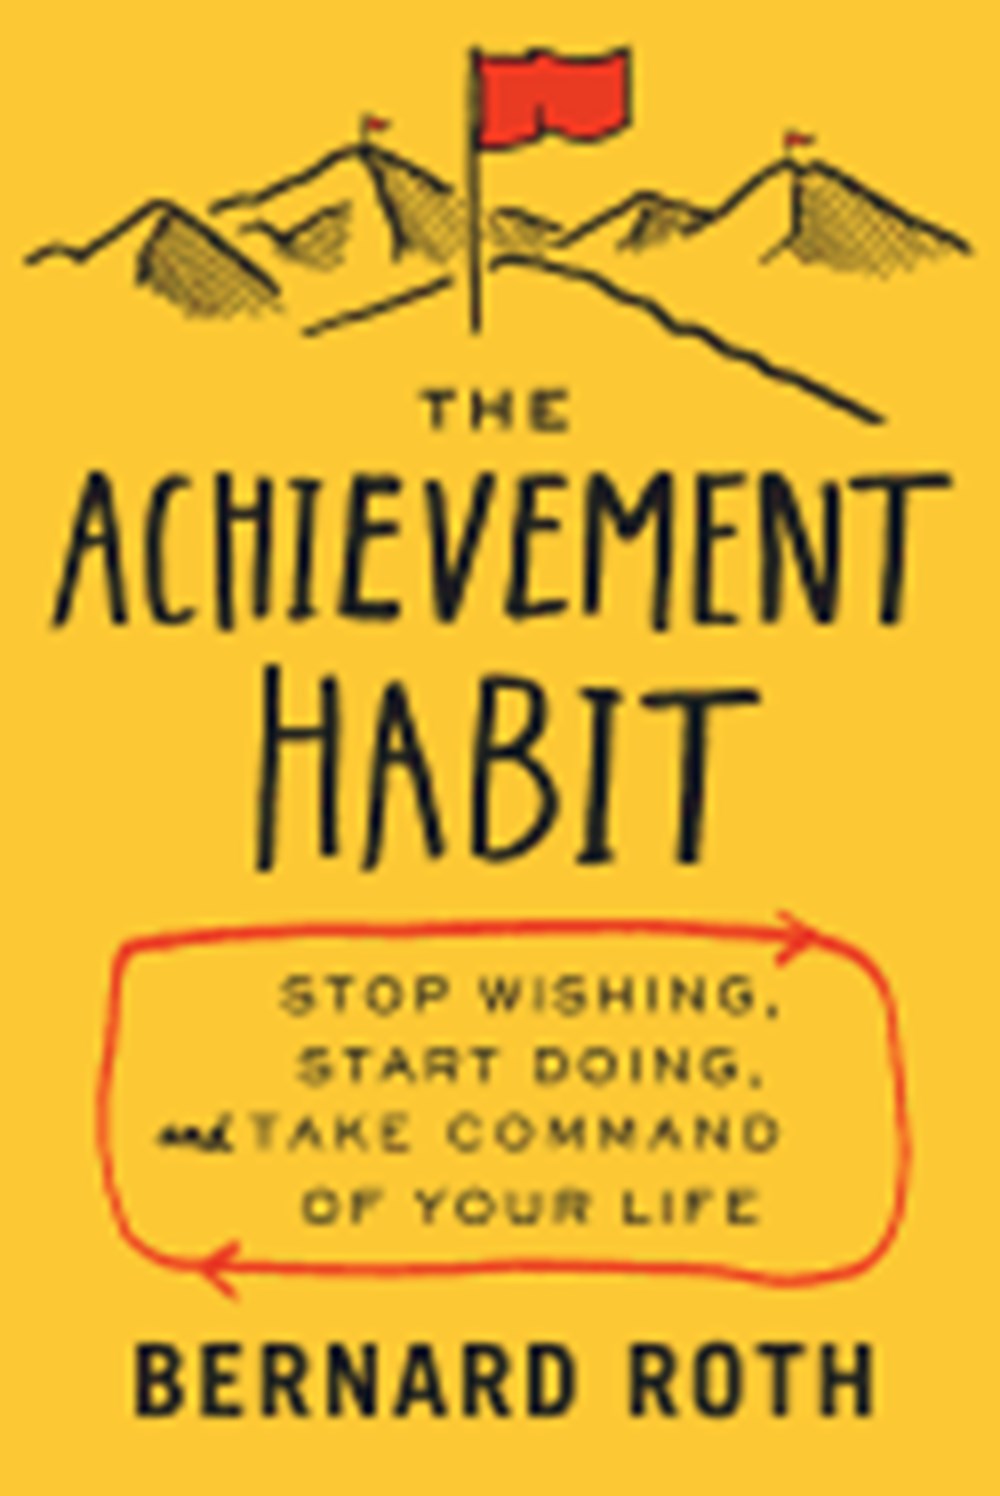 Achievement Habit Stop Wishing, Start Doing, and Take Command of Your Life